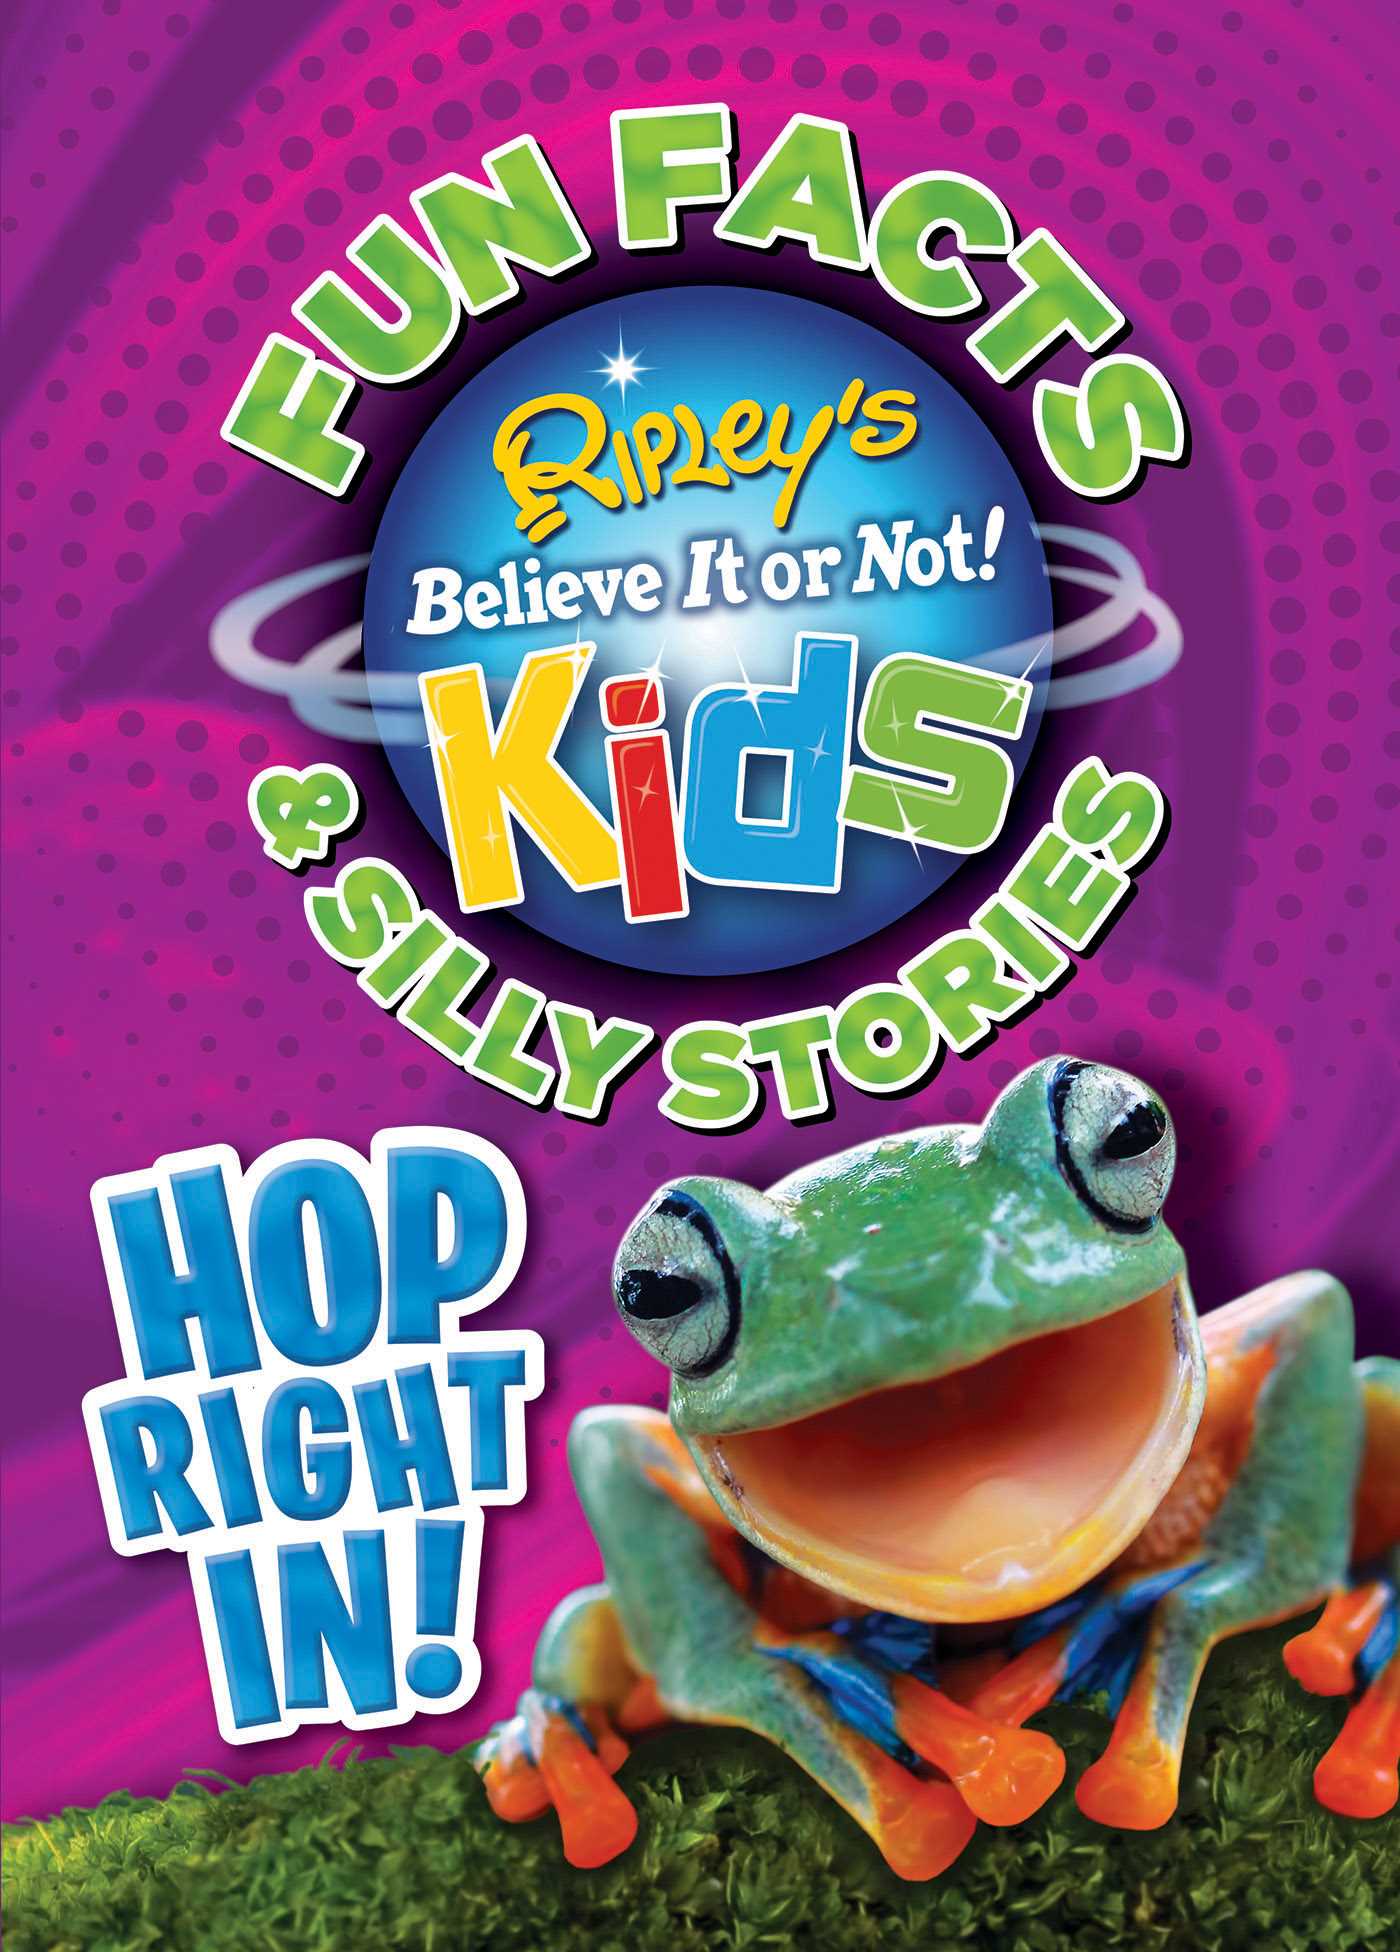 Ripley's Fun Facts &amp; Silly Stories: HOP RIGHT IN! | Believe It Or Not!, Ripley's